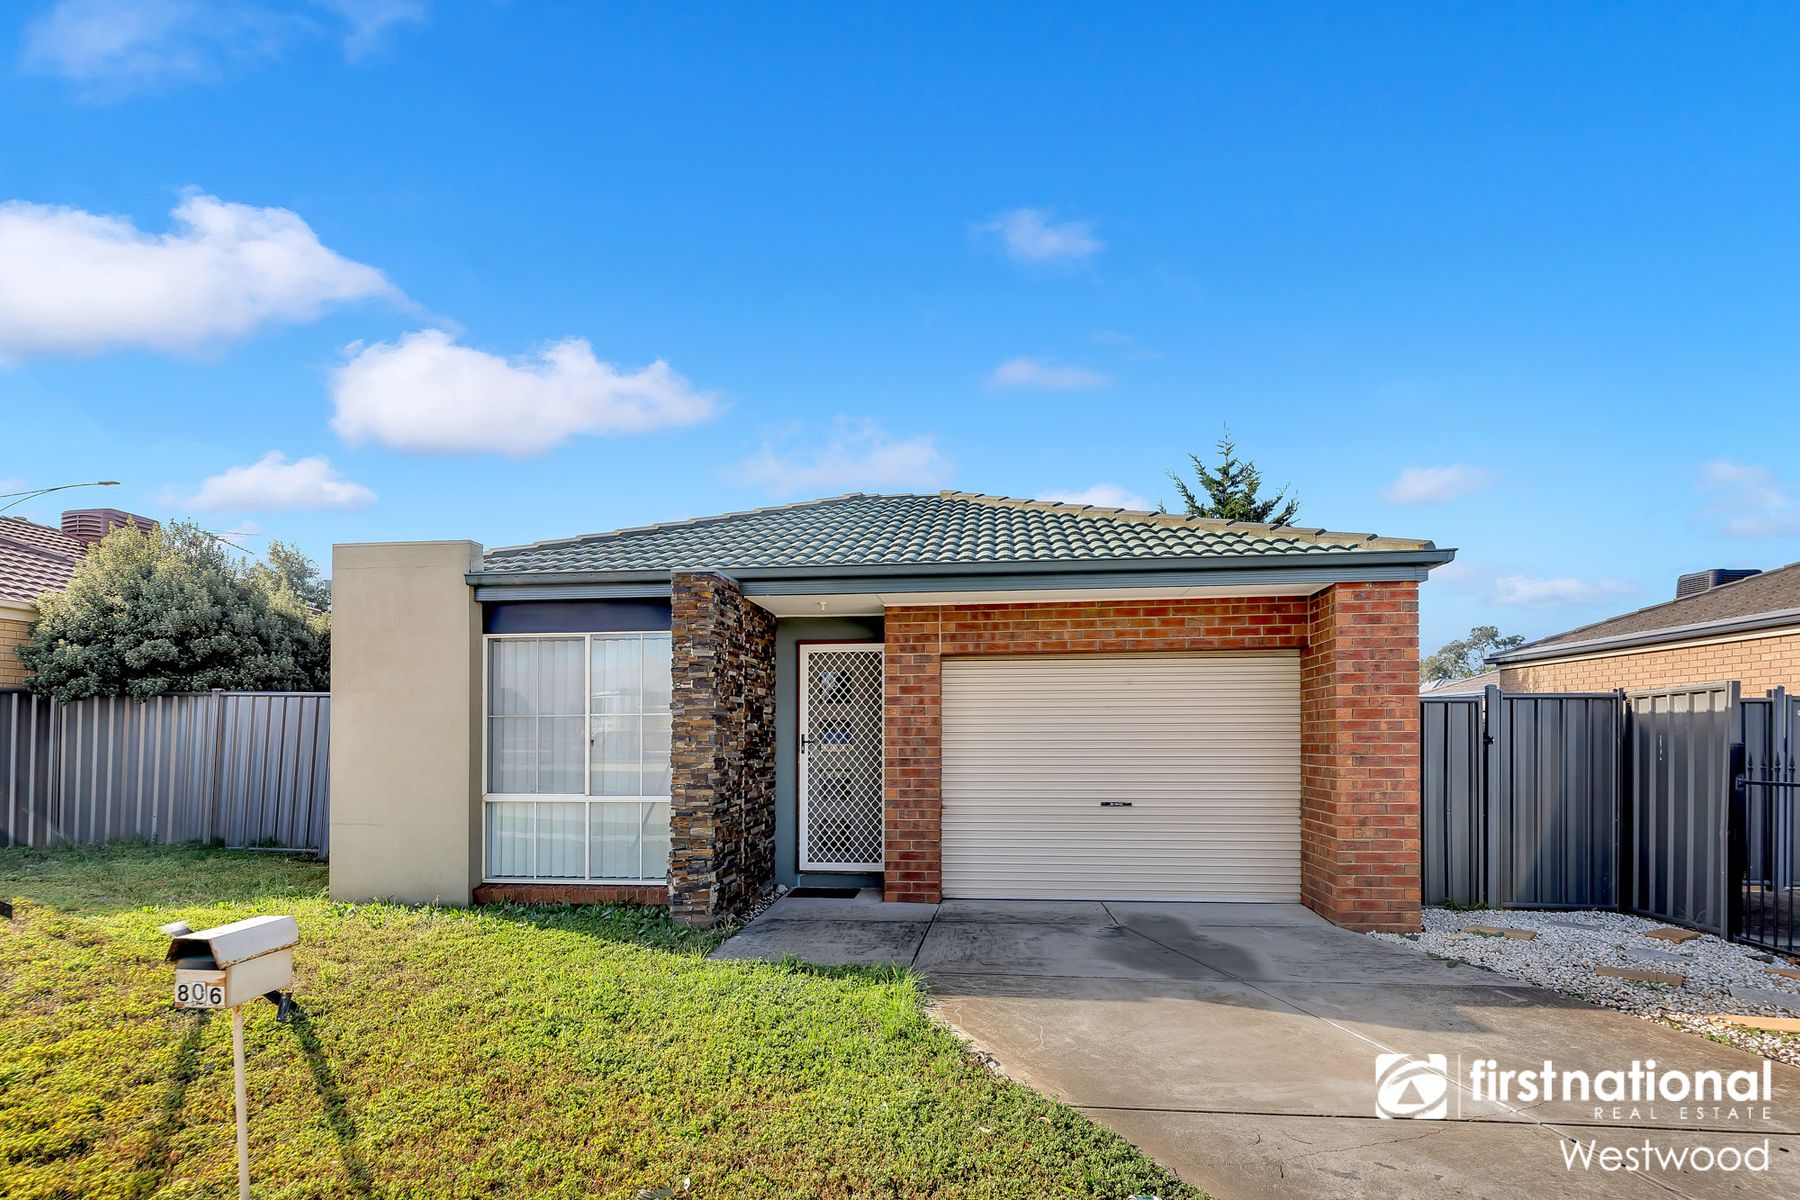 806 Armstrong Road, Wyndham Vale, VIC 3024